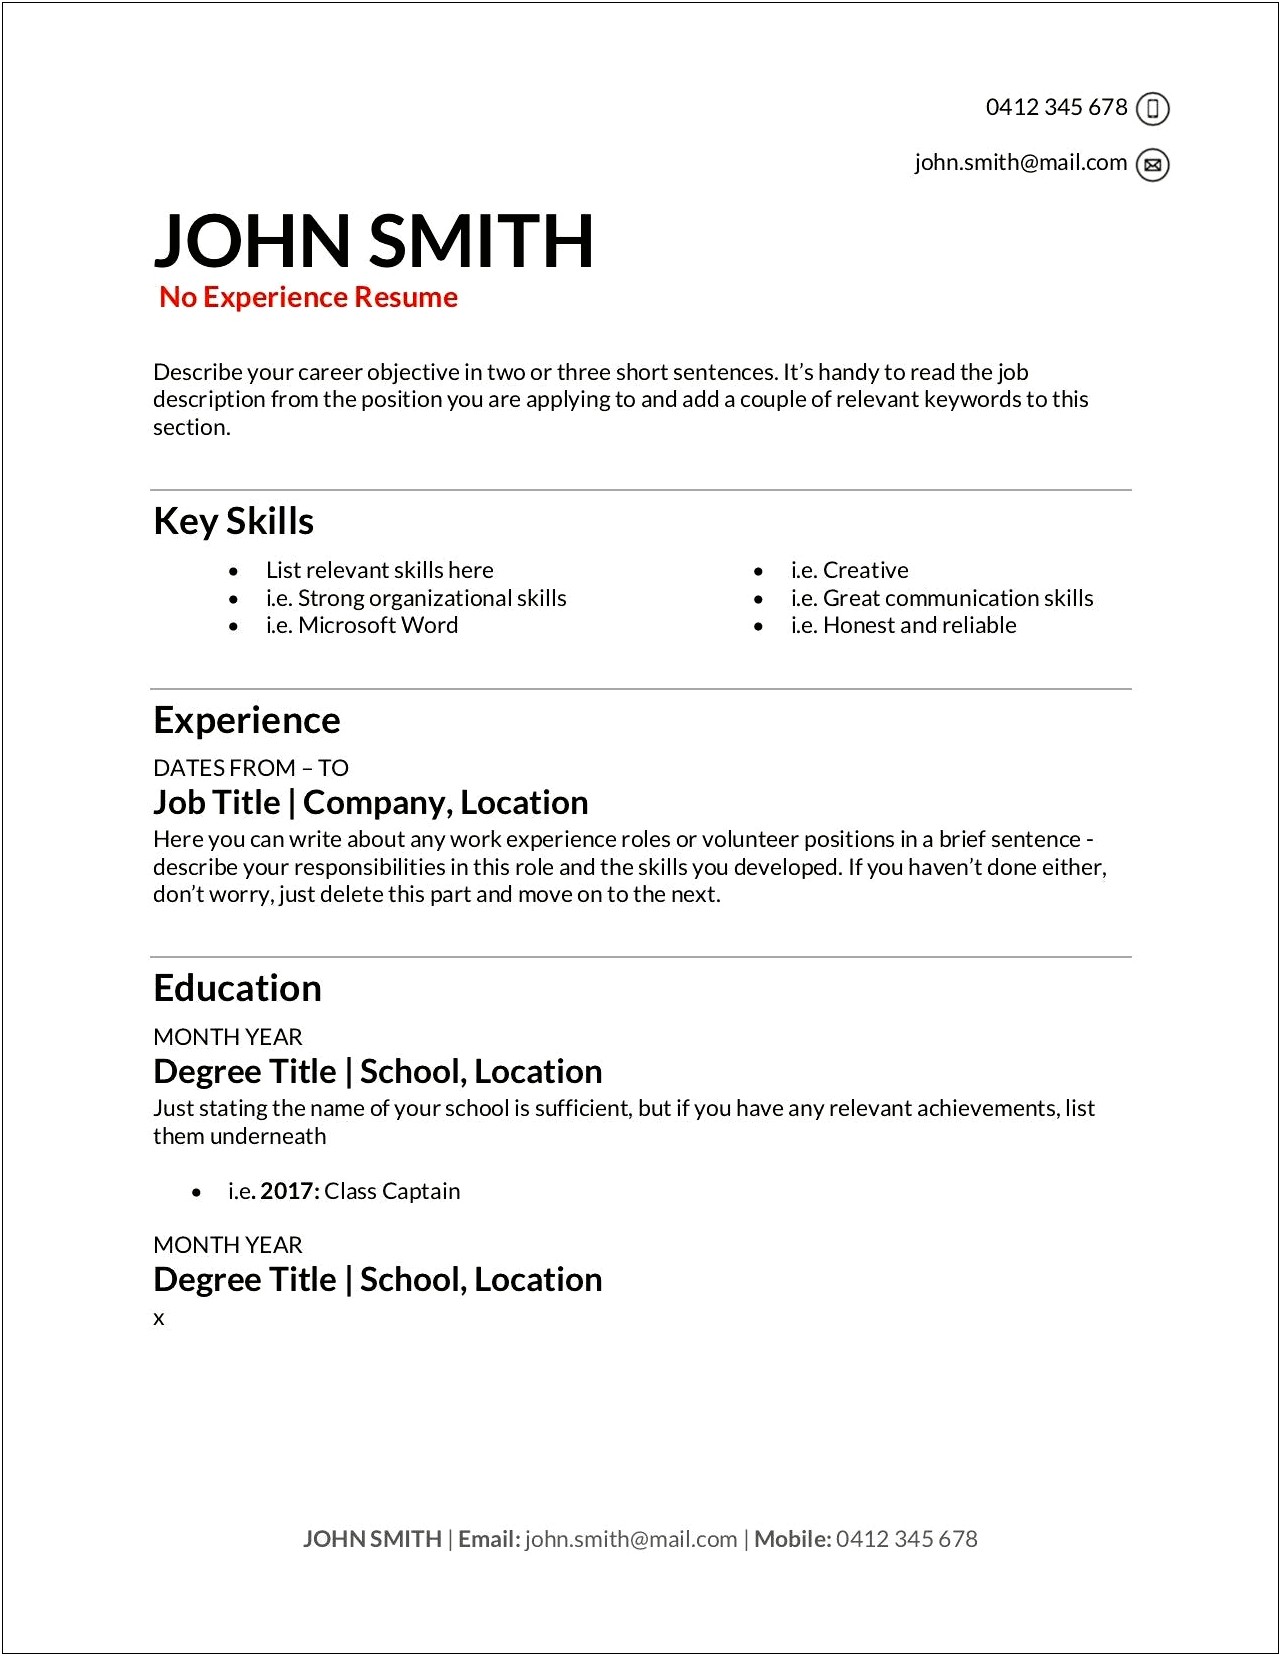 Resume For Jobs In Trades